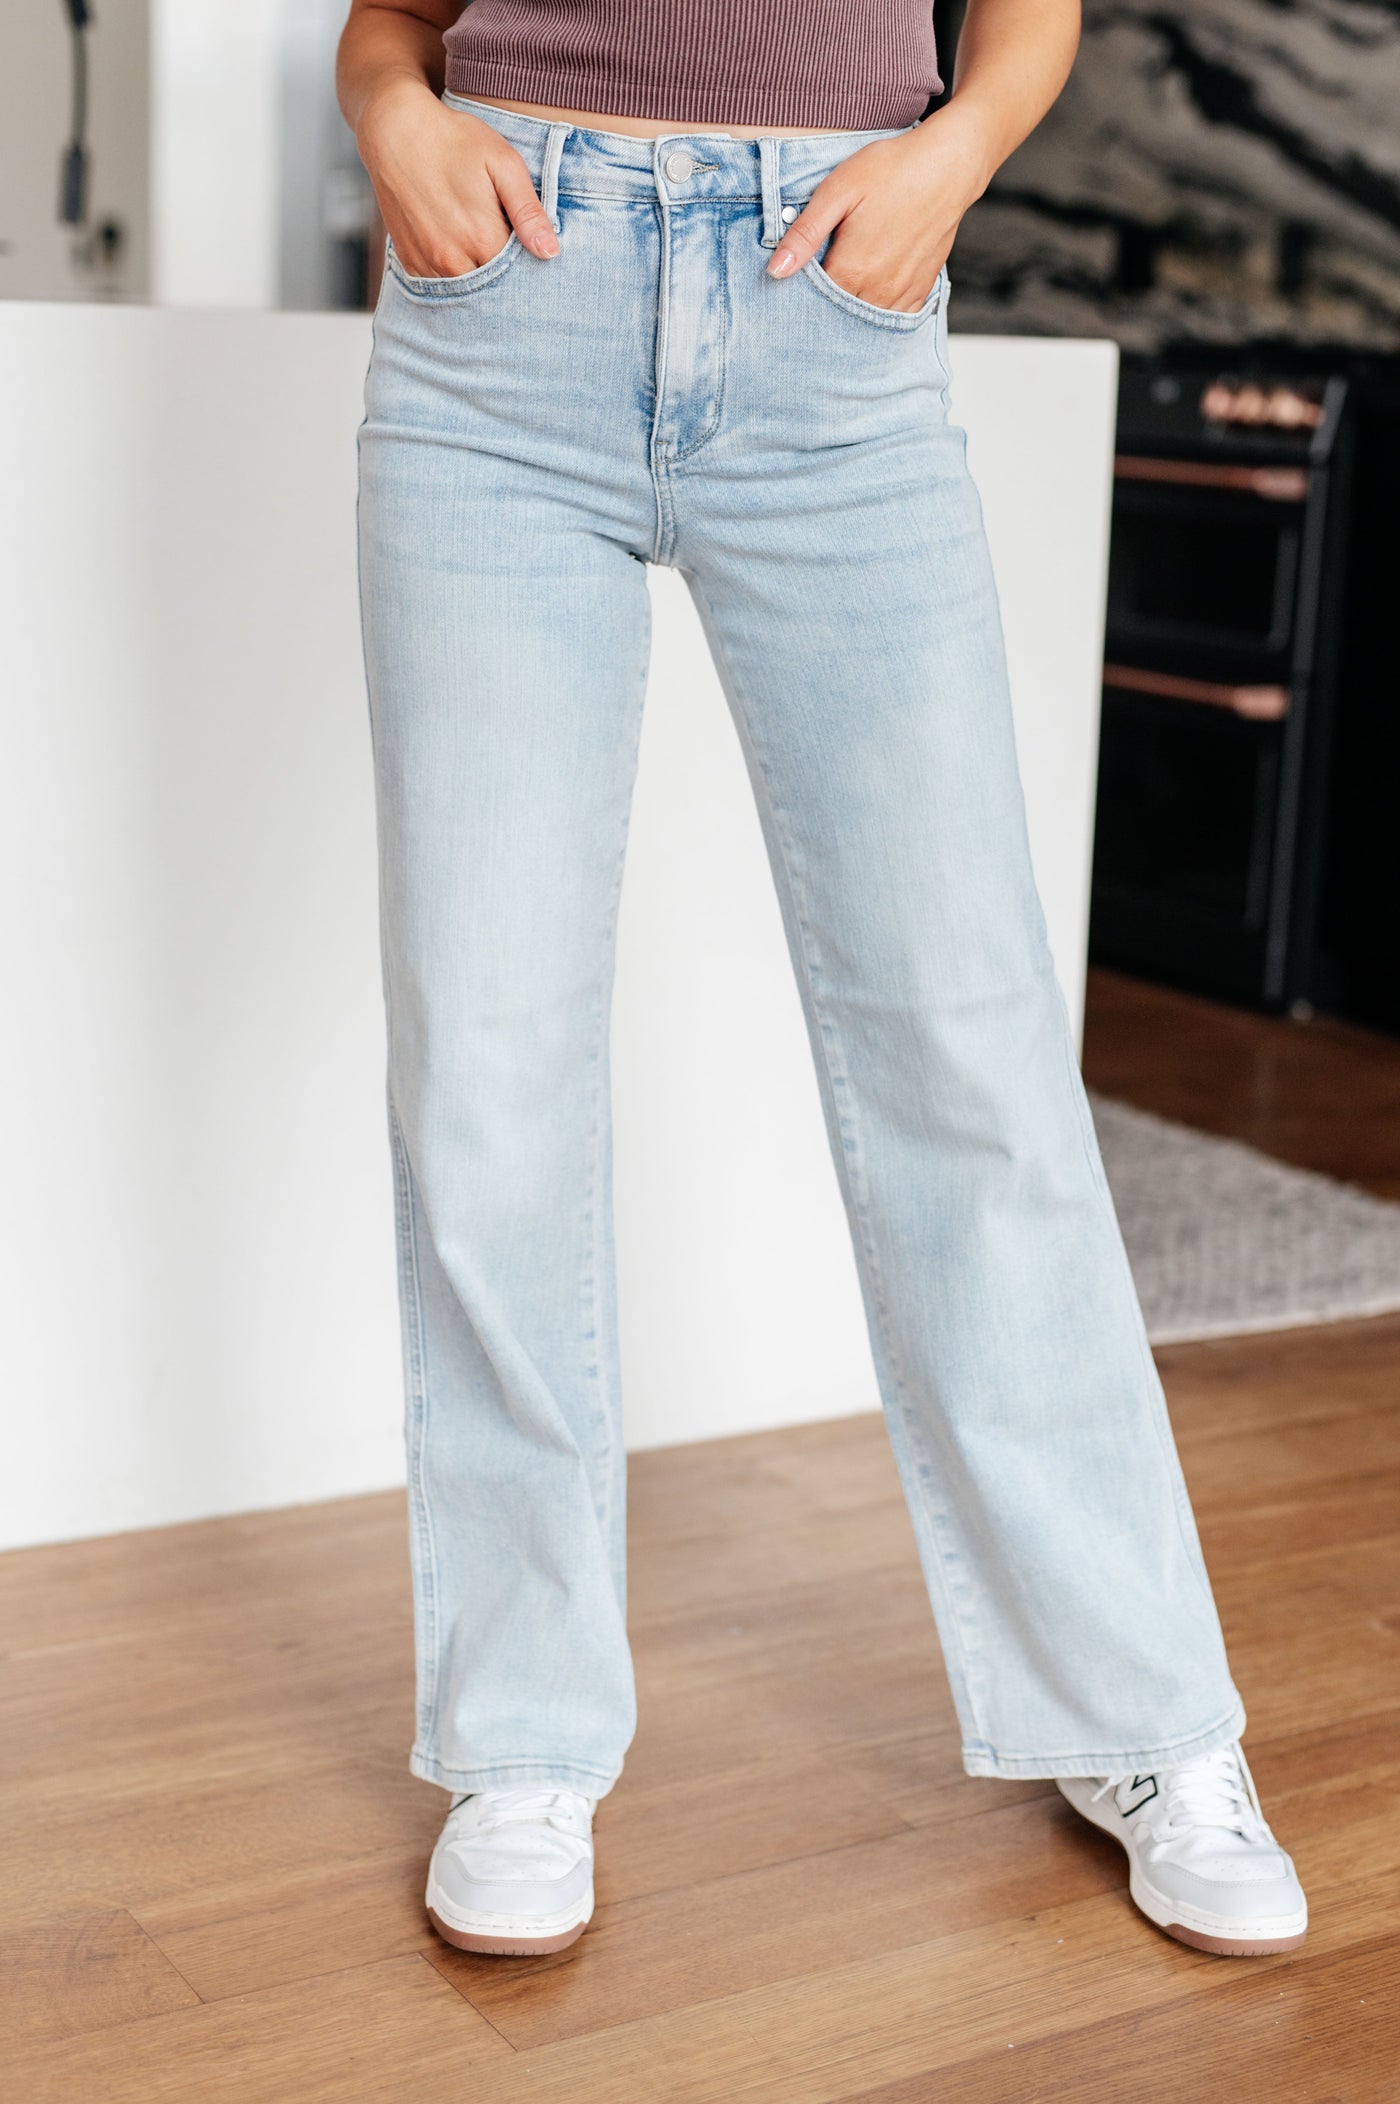 These vintage wash jeans feature tummy control technology for a flattering fit, while the non-distressed straight leg adds a touch of sophistication.